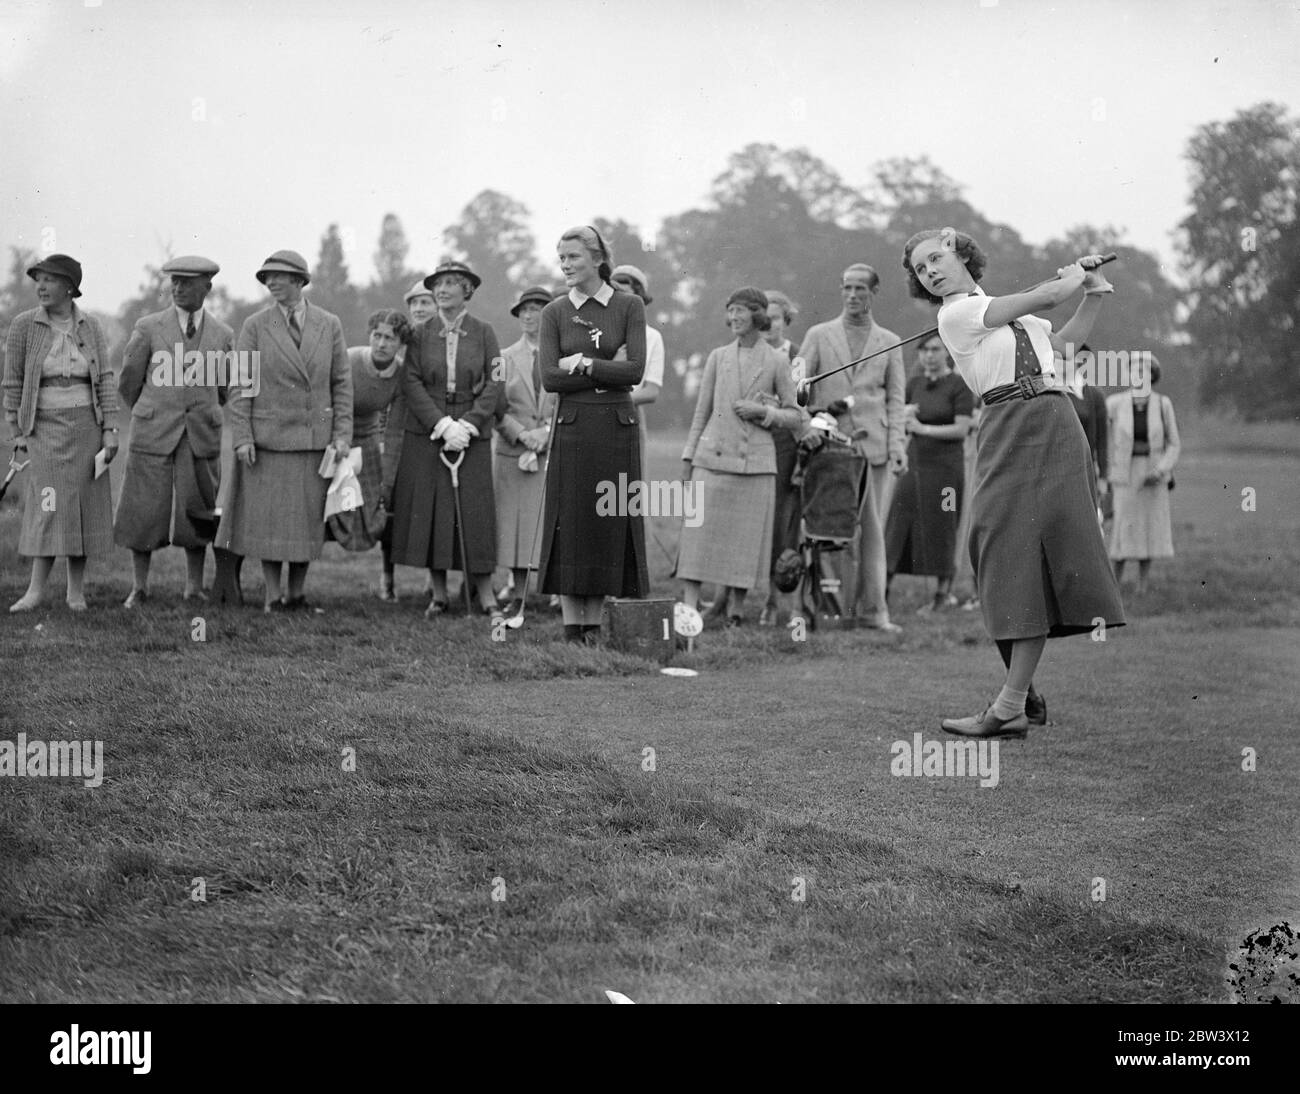 Girls open golf championship at Stoke Poges . The opening matches in the Girls Open golf championship are being played at Stoke Poges . Britian ' s leading girl players are being challenged by two French competitors Lally and Sonia Vagliano , and one South African , Miss Daphne Martyn from Port Elizabeth . Photo shows , Miss Monica Parnell driving from the first tee watched by her opponent , Miss Angela Noble ( by tee box ) and a gallery . 9 September 1936 Original caption from negative Stock Photo